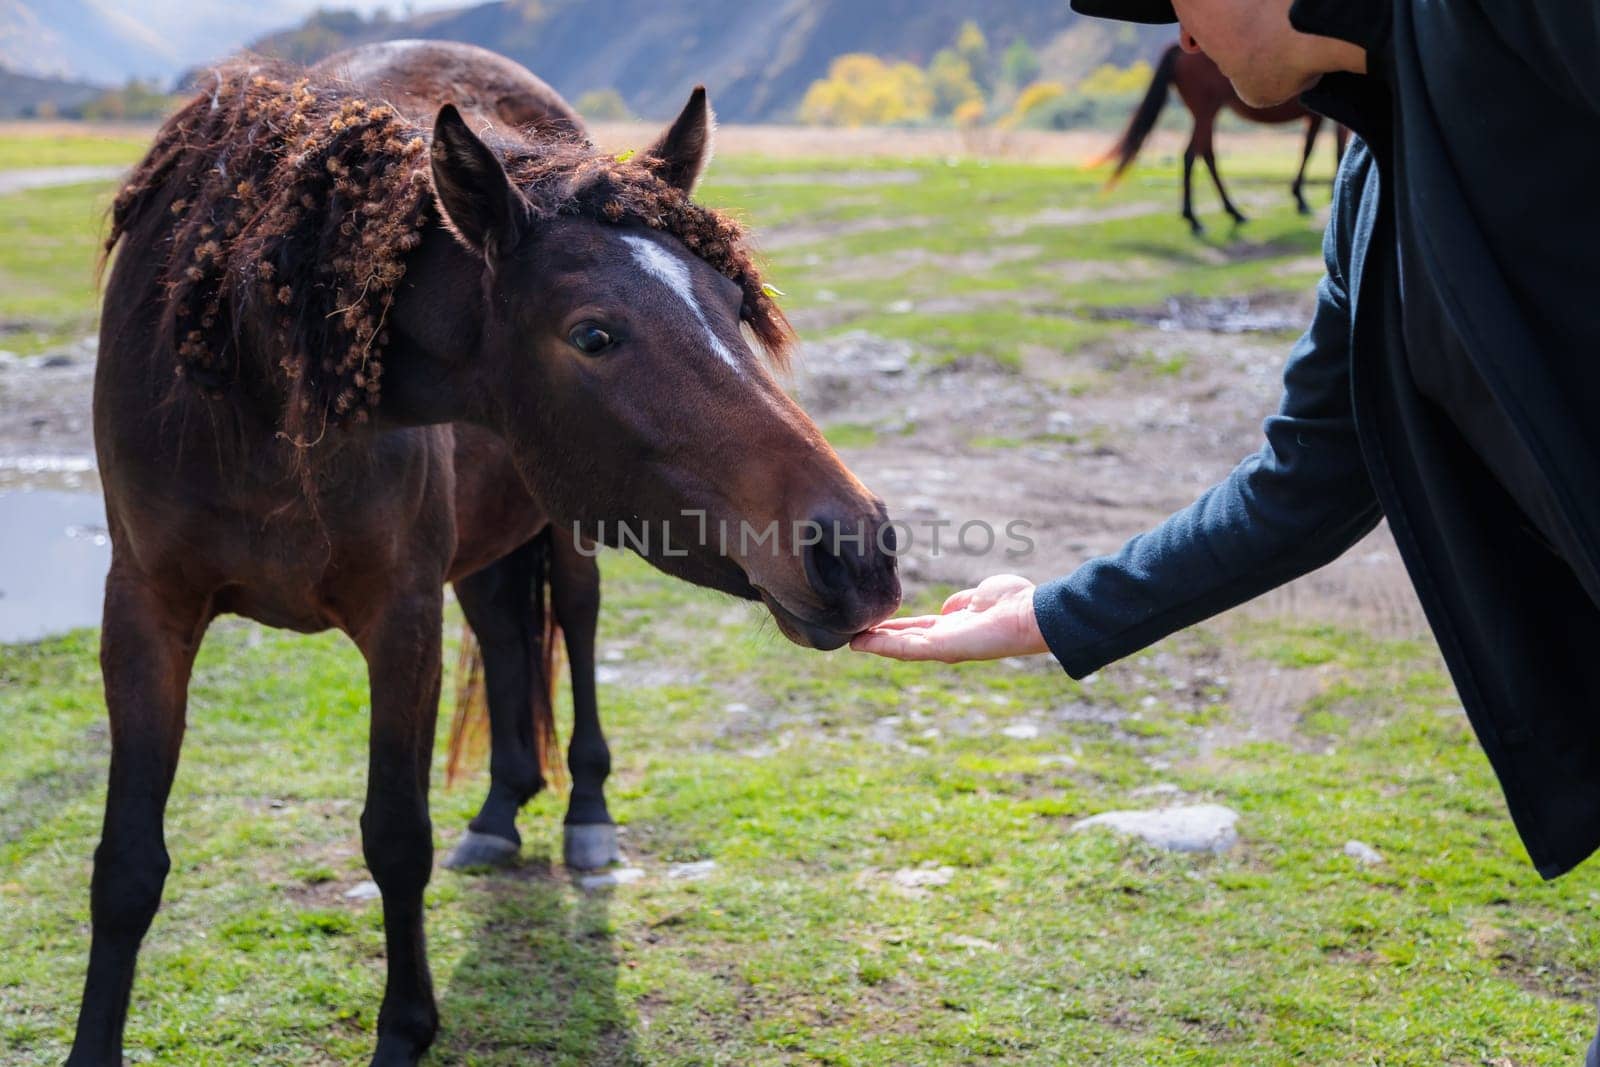 A calm moment in the mountains: a man wins the heart of a wild horse by feeding it from the palm of his hand